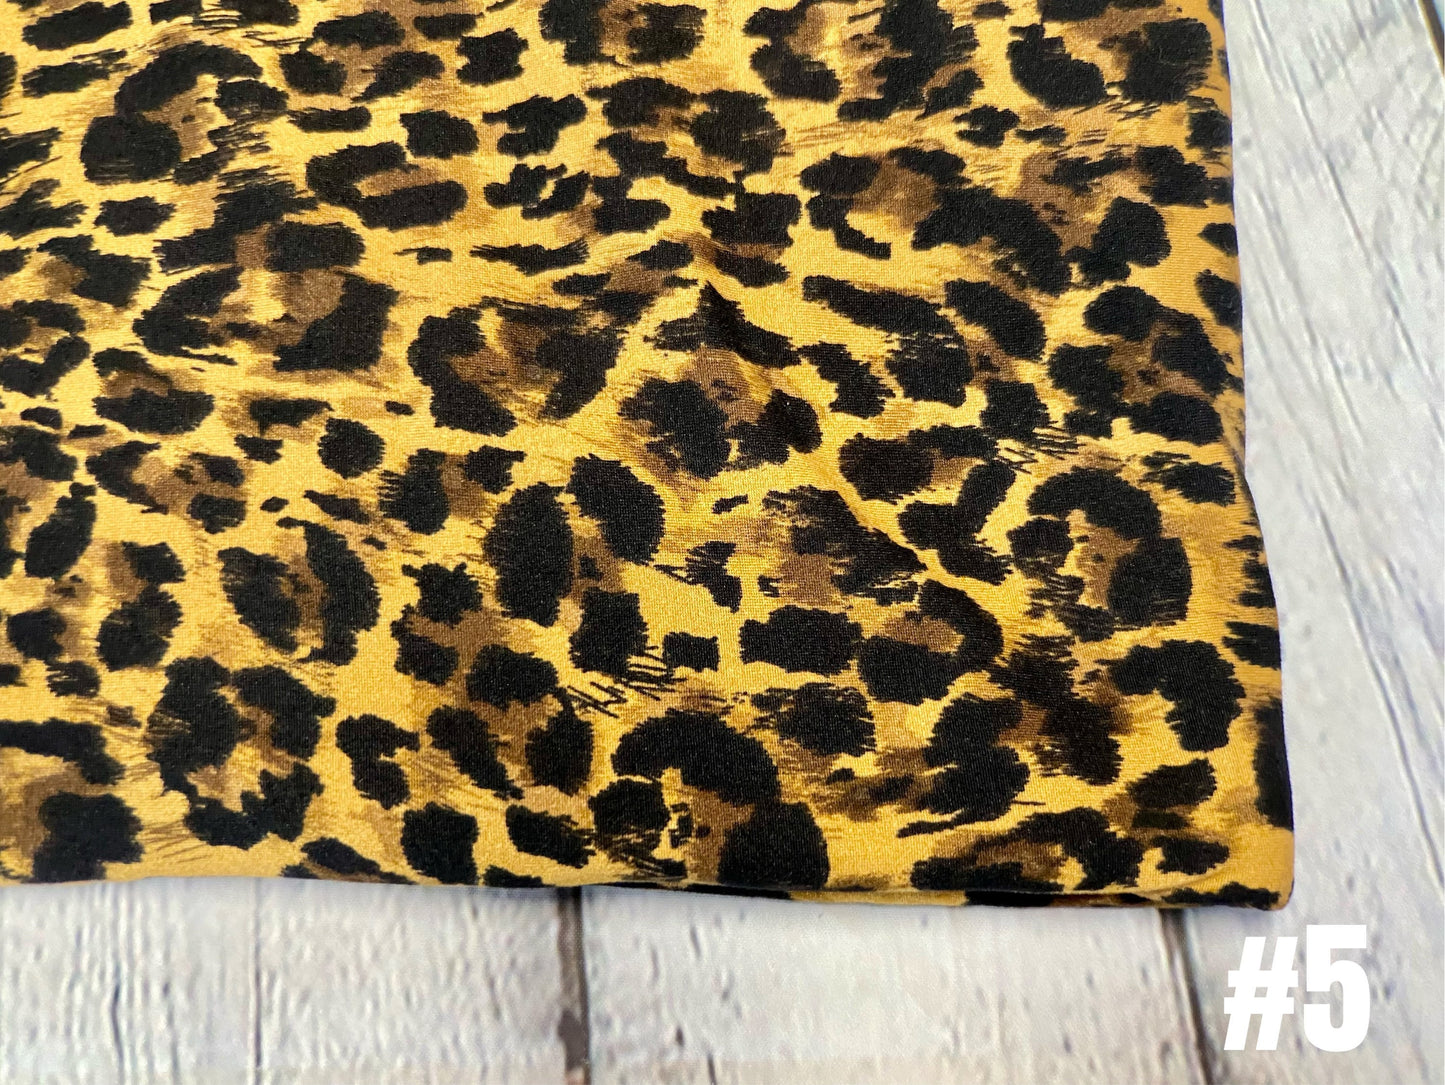 DBP Leopard Cheetah Animal Print Fabric By The Yard Double Brush Poly Print Soft Butter Fabric